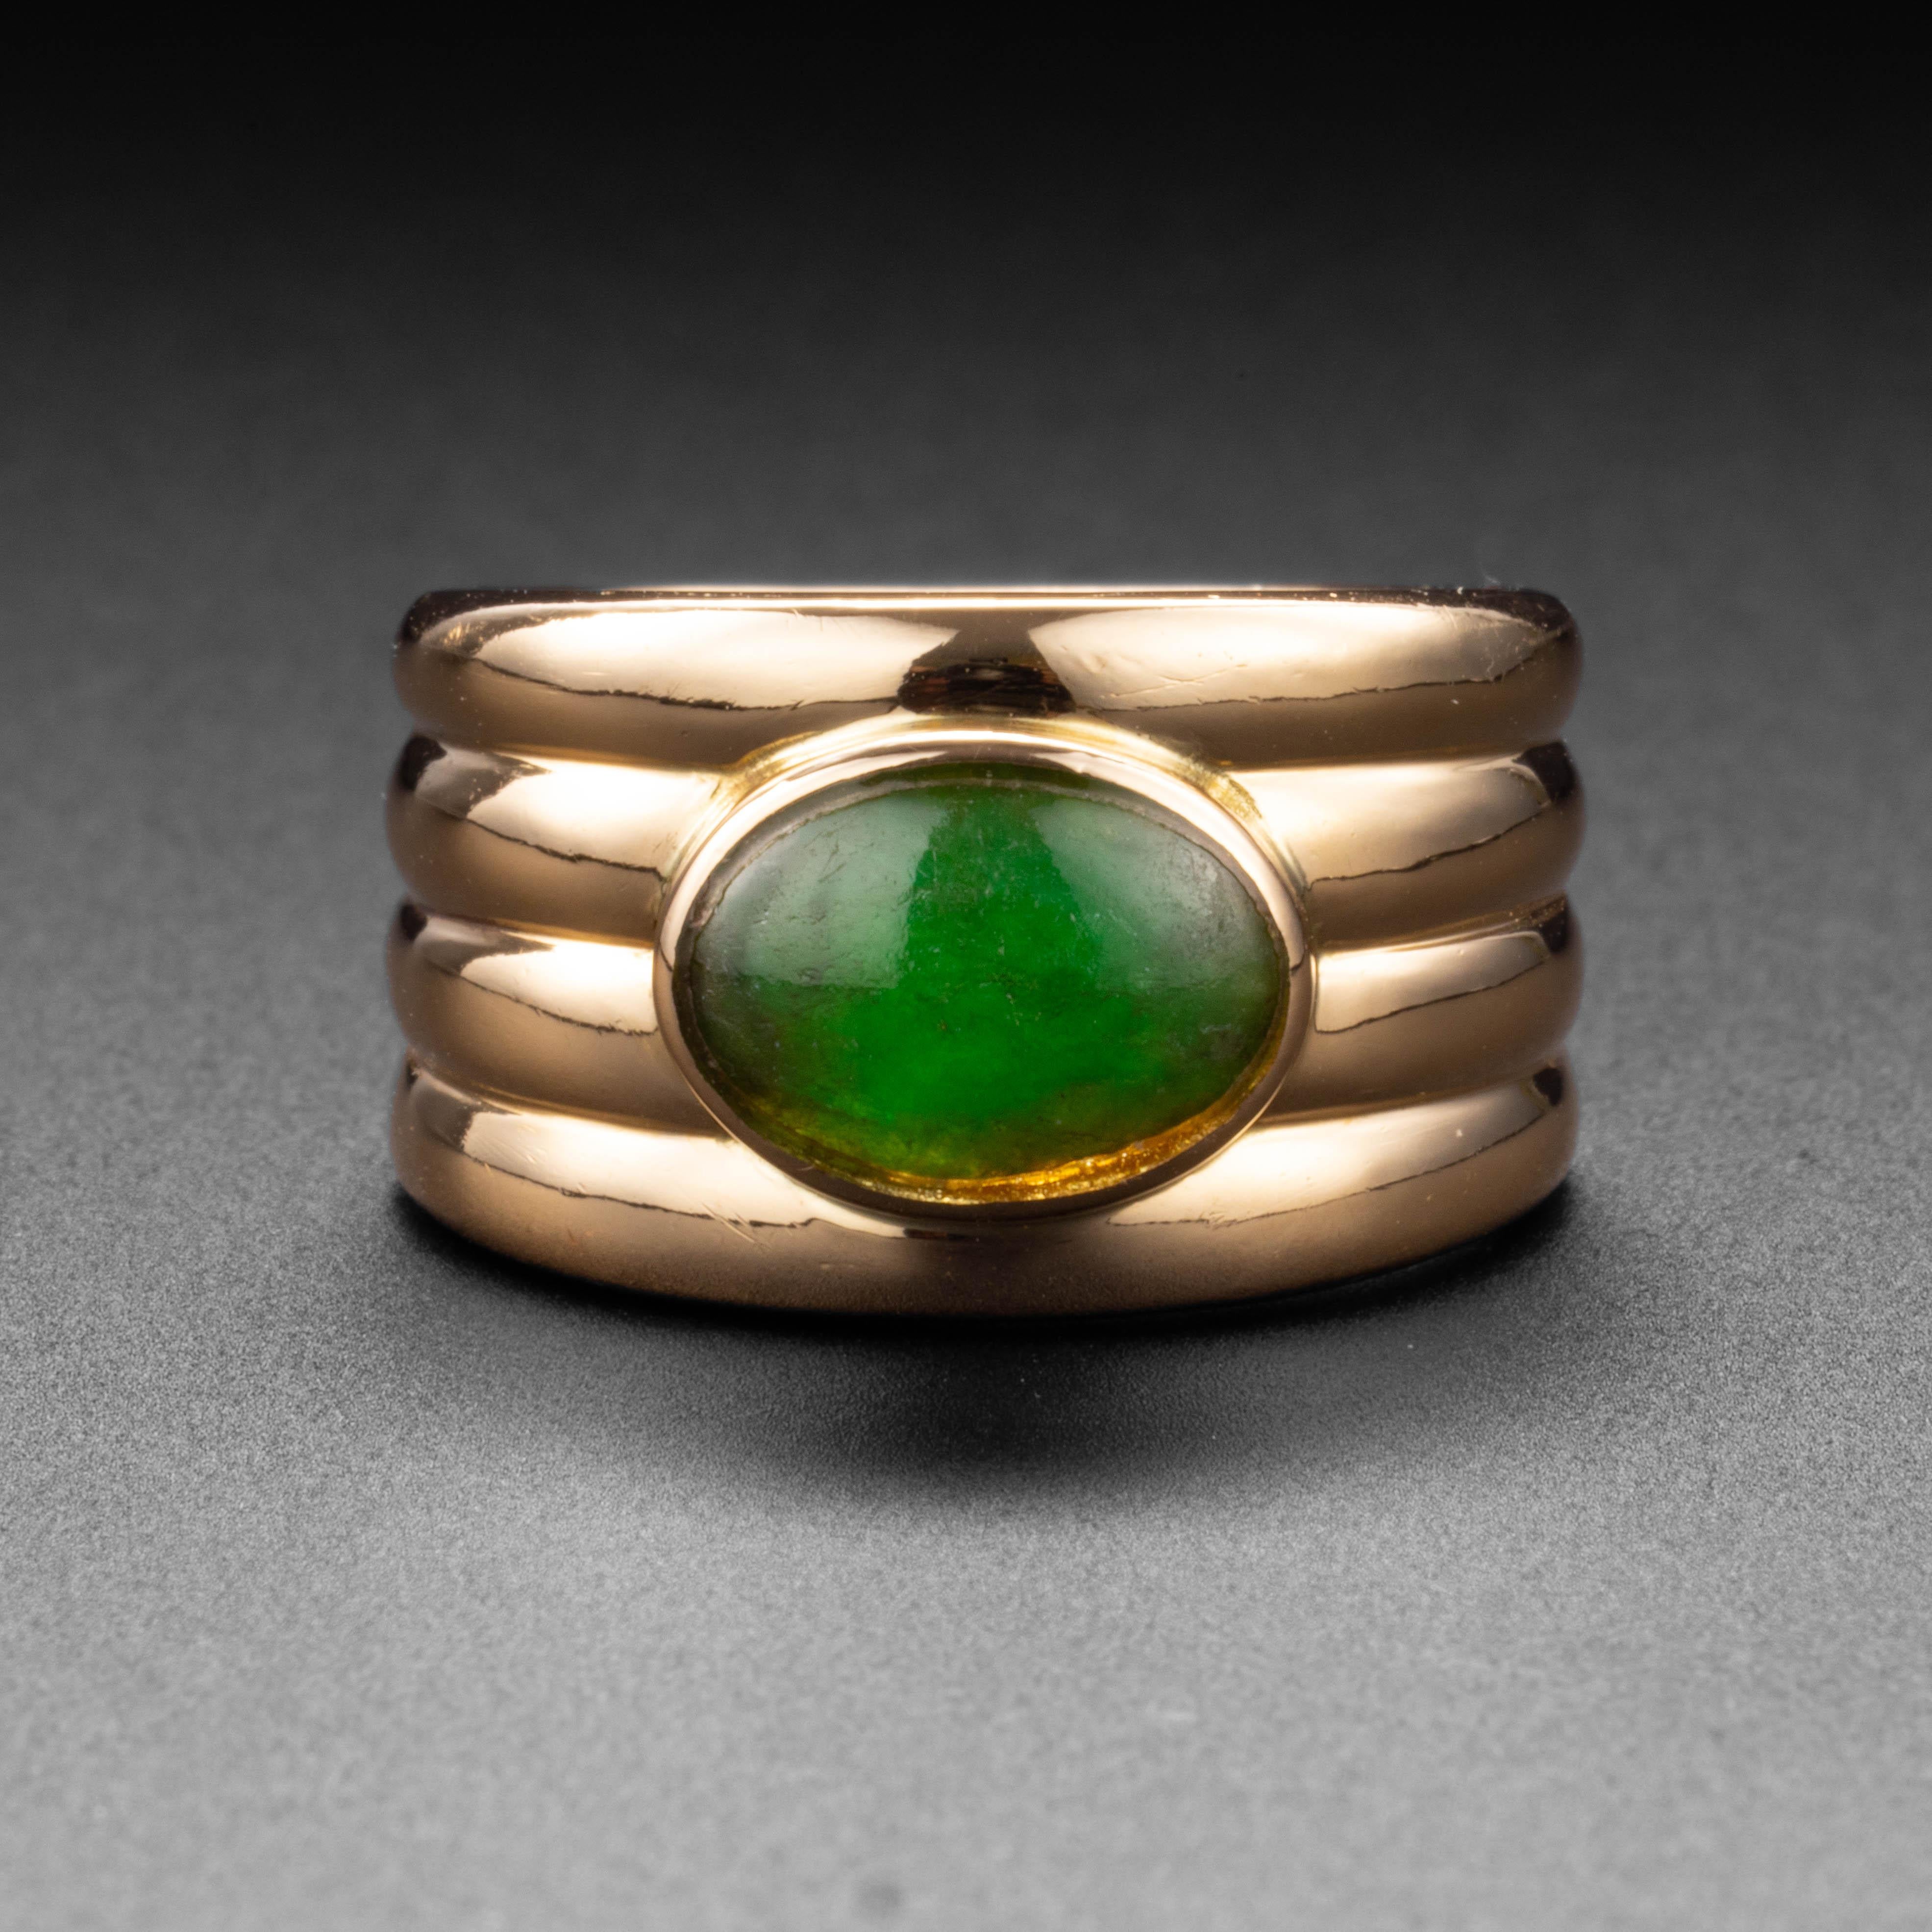 This mint-condition early Mid-century 14K yellow gold band ring features a 10.6 x 7.7mm cabochon of natural, untreated Burmese jadeite jade. The ring was created by Ming's of Hawaii; an iconic Hawaiian jeweler who created magnificent and unusual